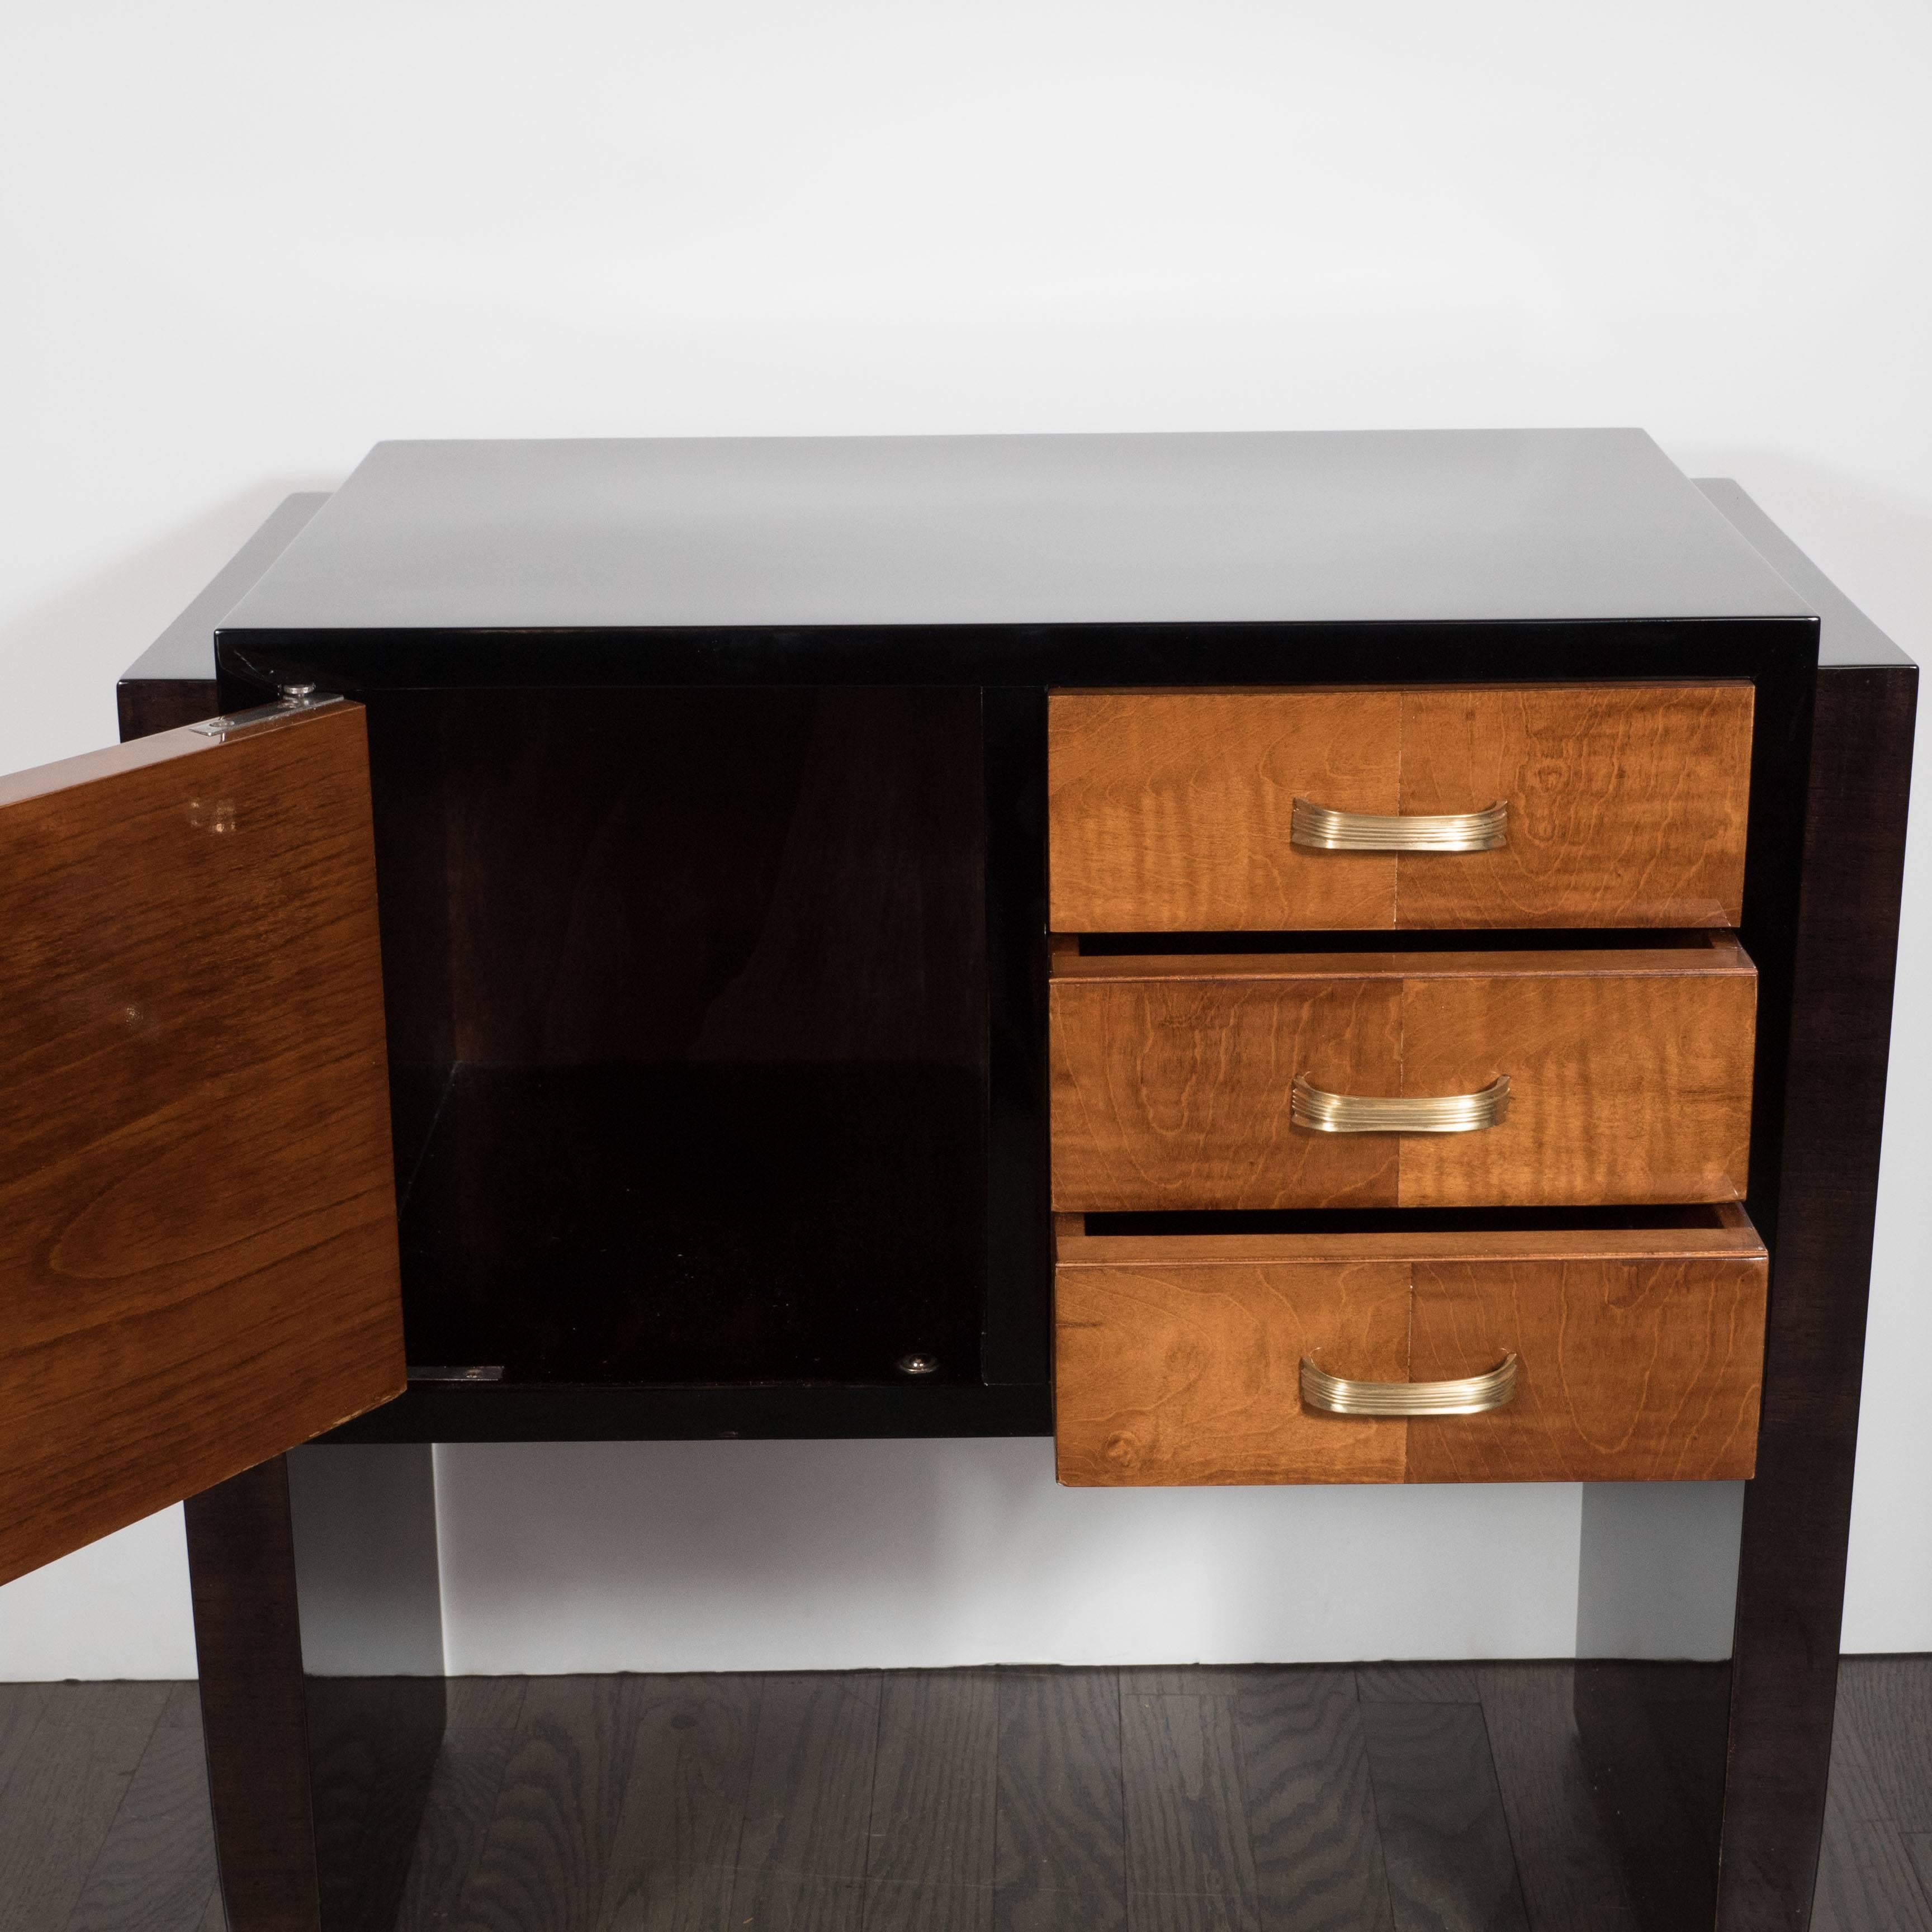 American Pair of Art Deco Nightstands or End Tables in Burled Elm and Ebonized Walnut